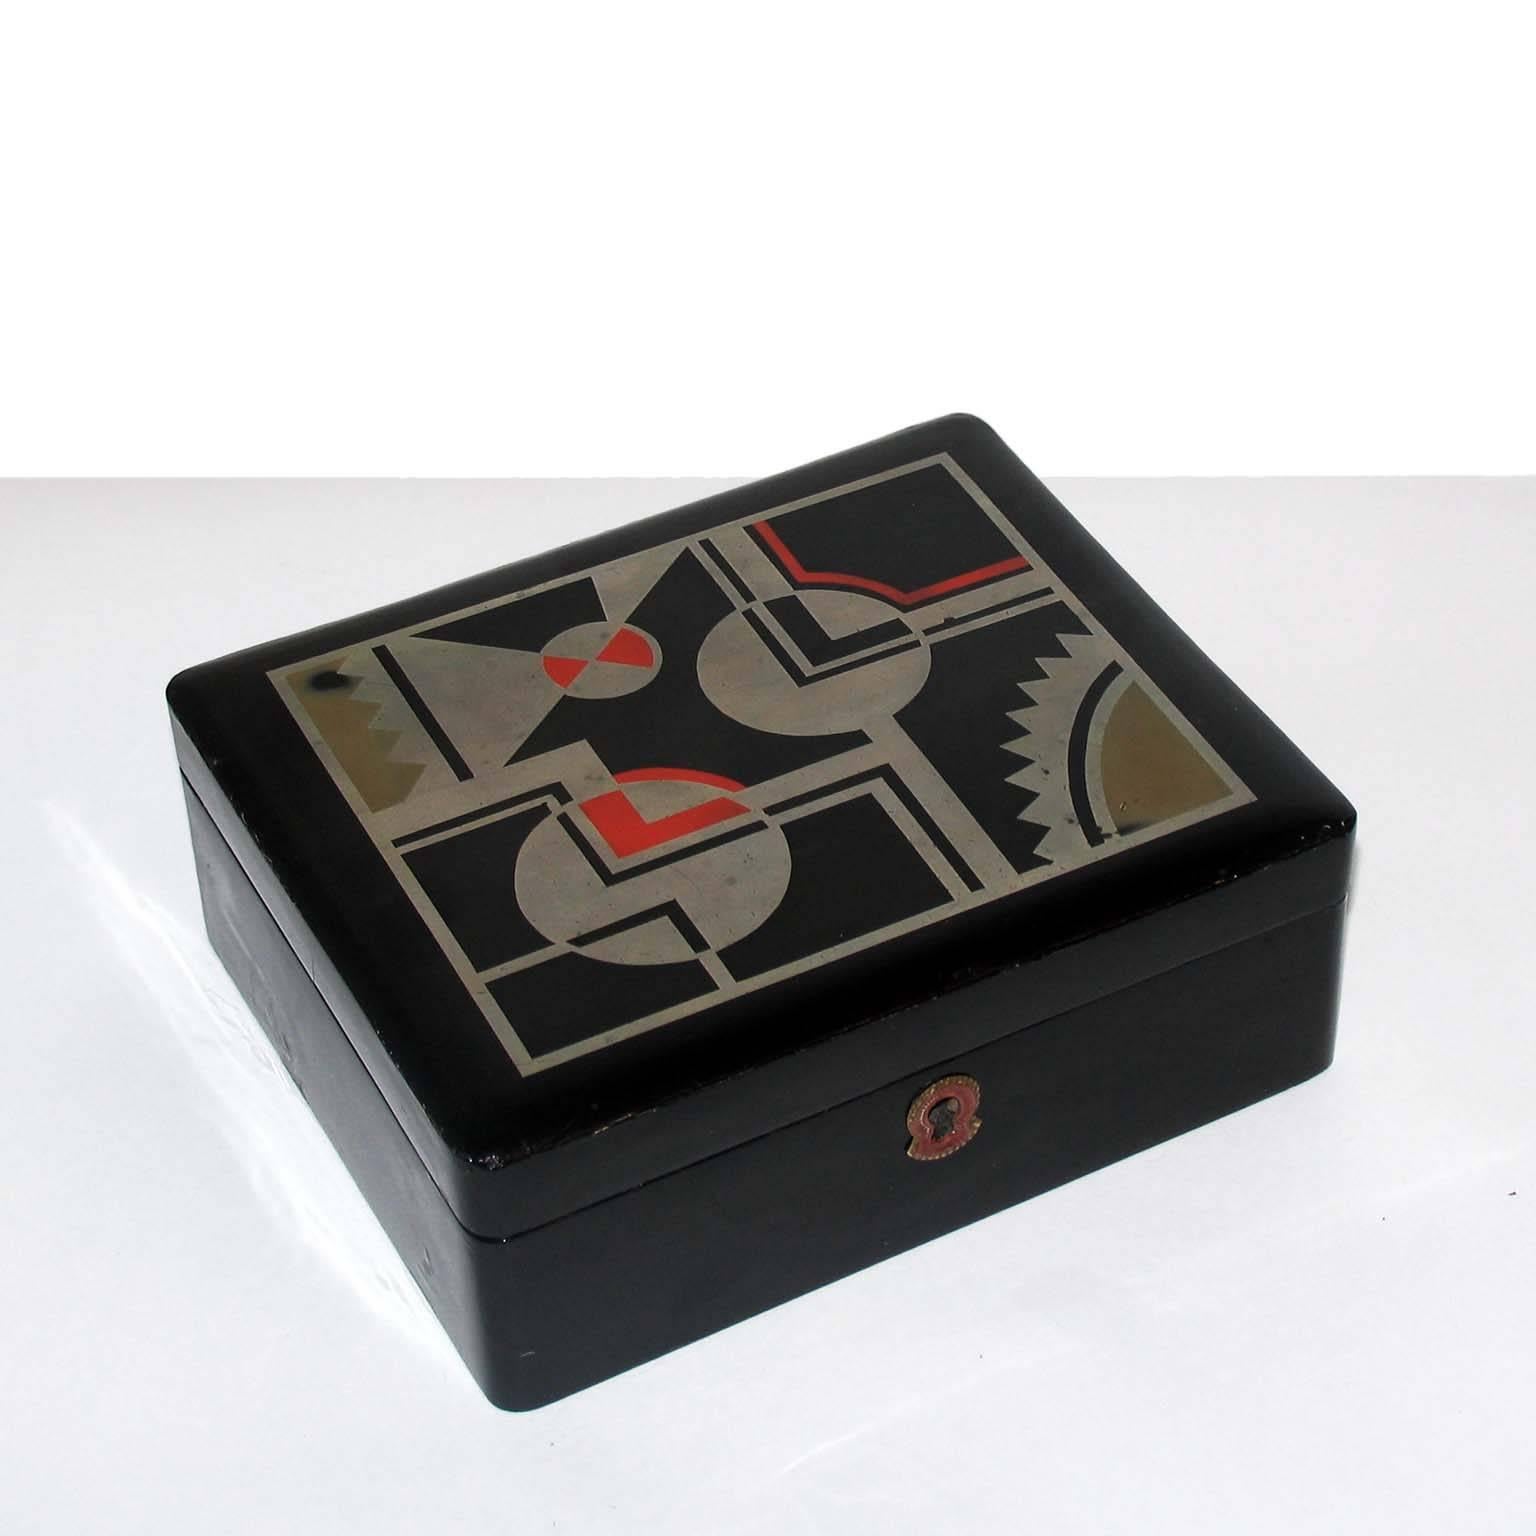 Art Deco French lacquered box, jewelry box, geometric decor, in the style for Jean Dunand.
Decorative or jewelry Art Deco box, France, circa 1930. Black lacquered, lid decorated with geometric design in silver leaf, light red and beige lacquer.